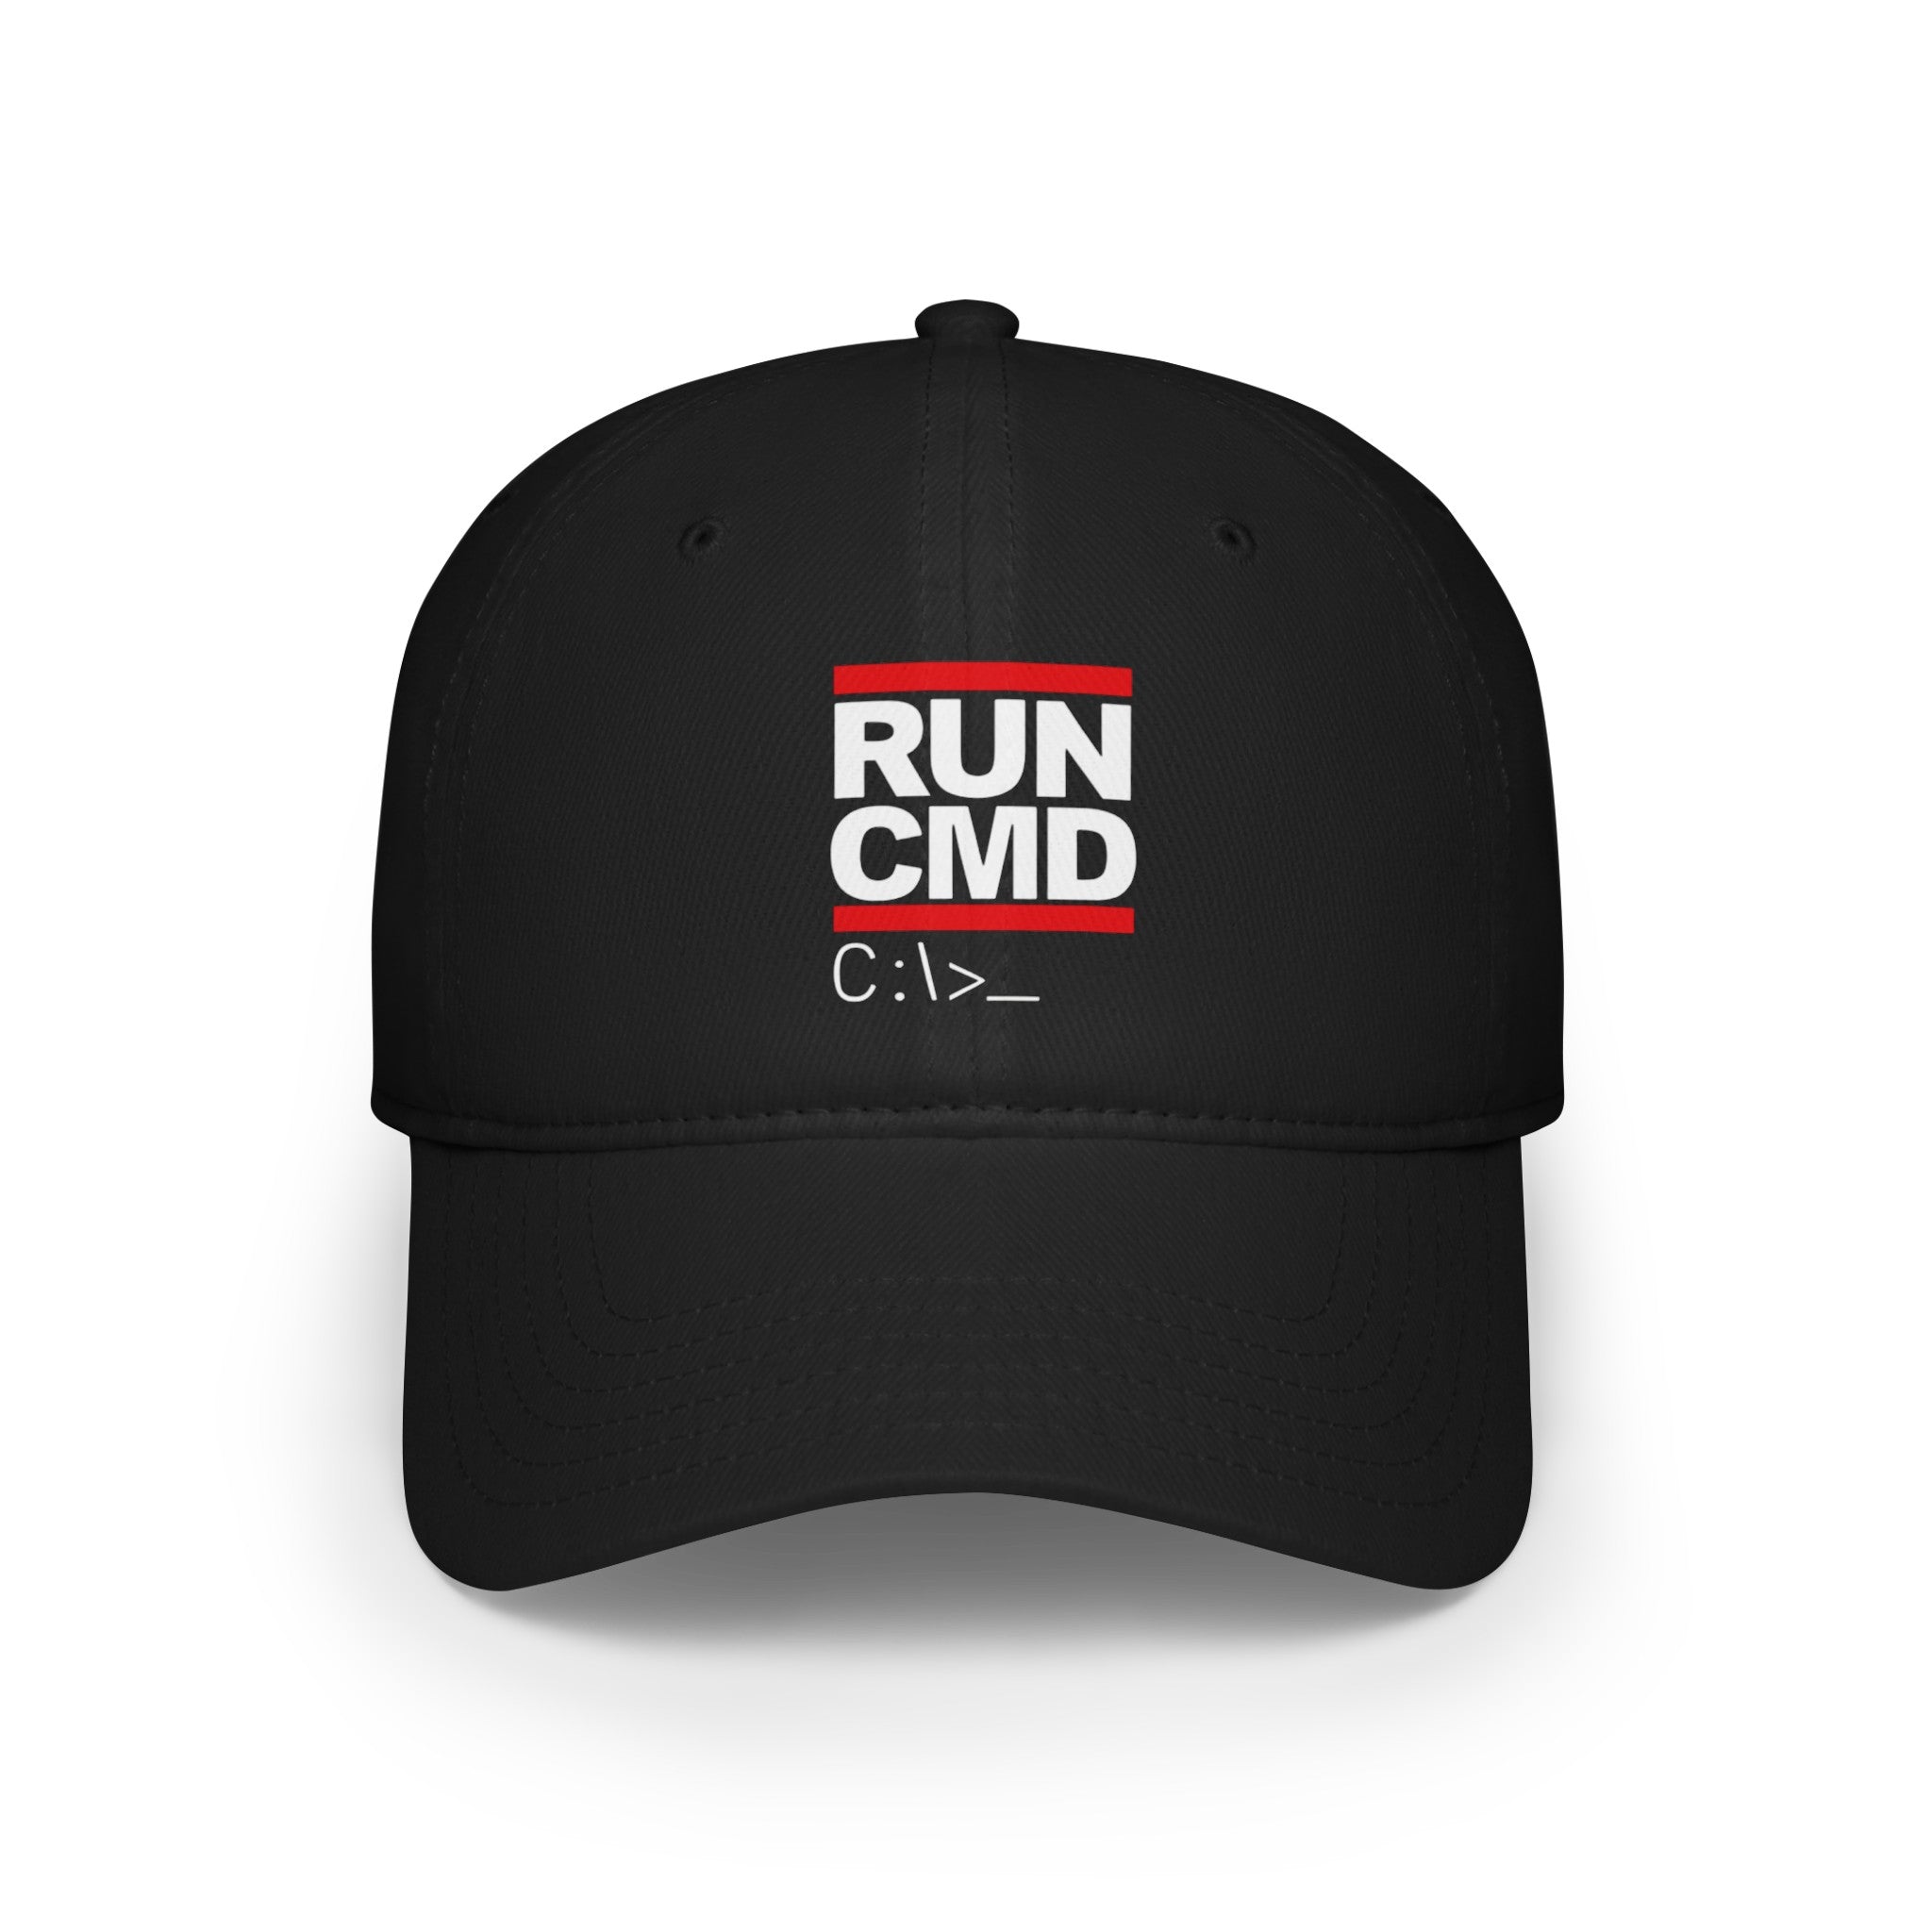 RUN CMD - Hat with a design featuring "RUN CMD" in white and red text, and "C:\>" below it, referencing command prompt. The cap boasts reinforced stitching for added durability.